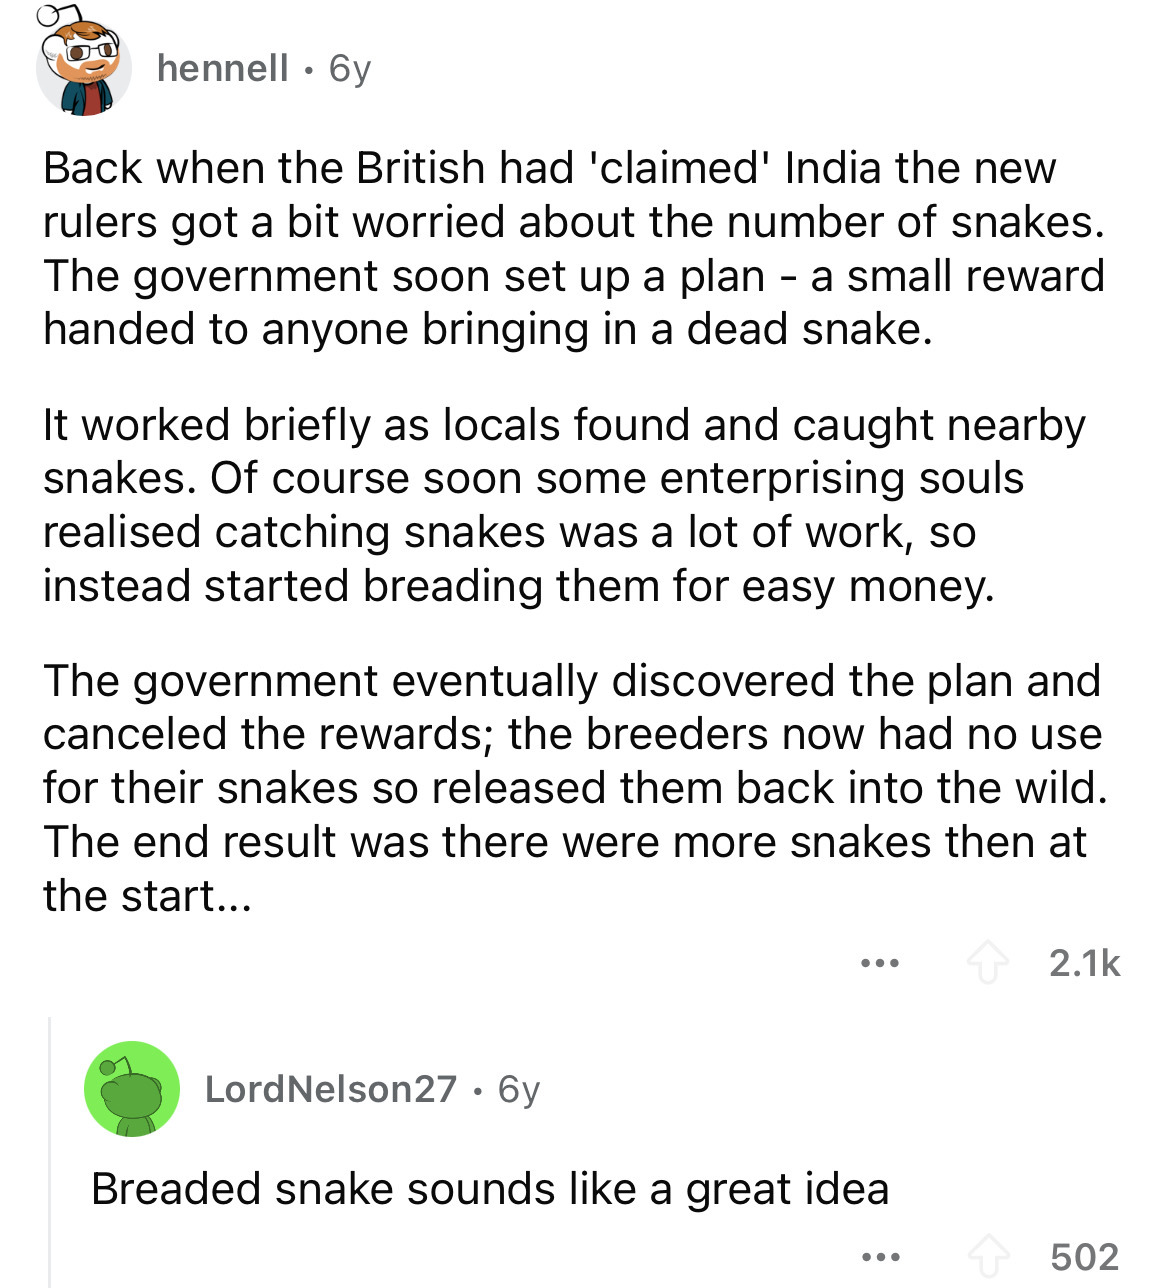 screenshot - hennell 6y . Back when the British had 'claimed' India the new rulers got a bit worried about the number of snakes. The government soon set up a plan a small reward handed to anyone bringing in a dead snake. It worked briefly as locals found 